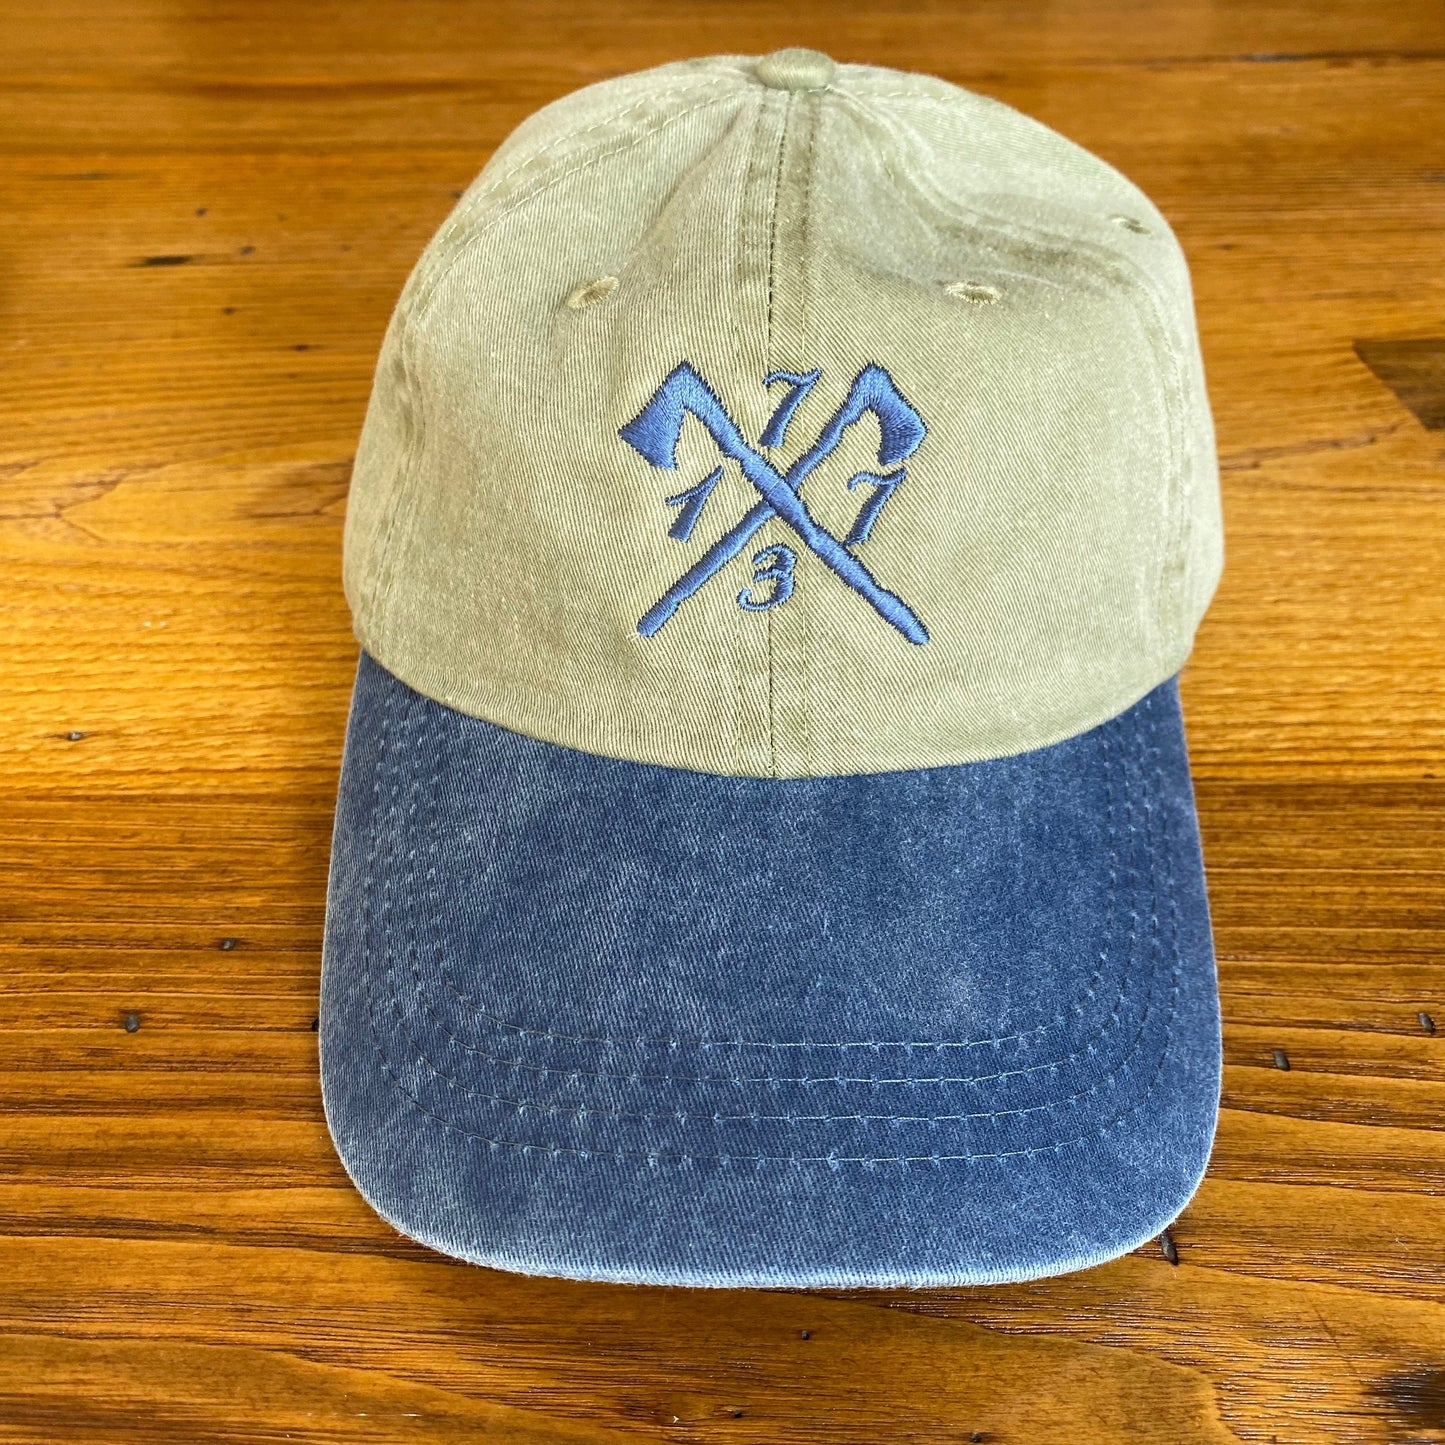 Embroidered "1773" Boston Tea Party Two-tone cap - Khaki/Navy from The History List Store.